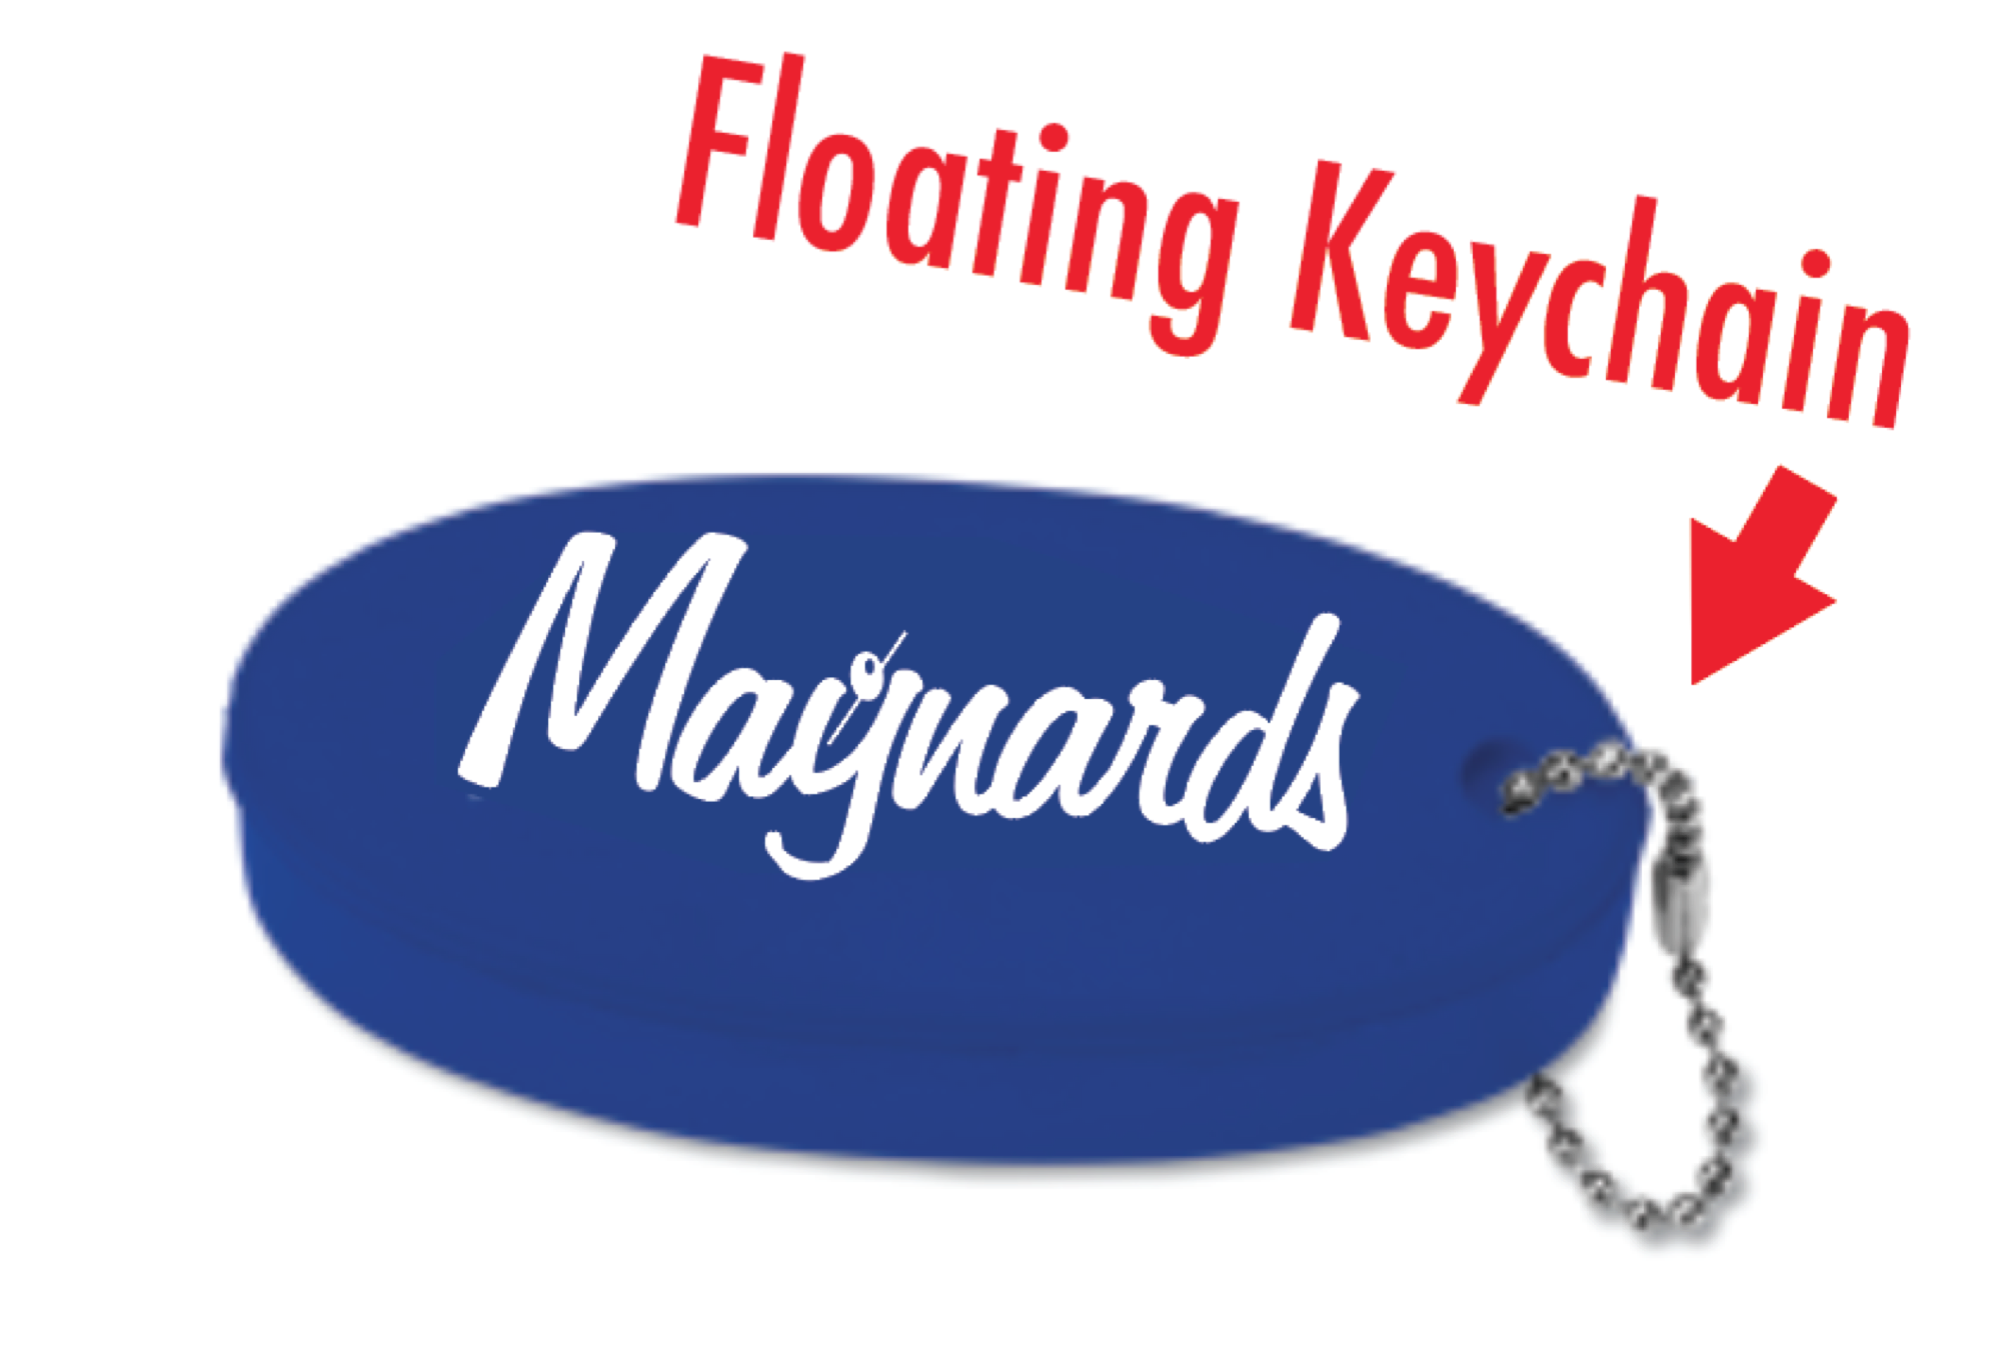 Maynards Floating Keychain - Bryant Heating And Cooling (2000x2000)